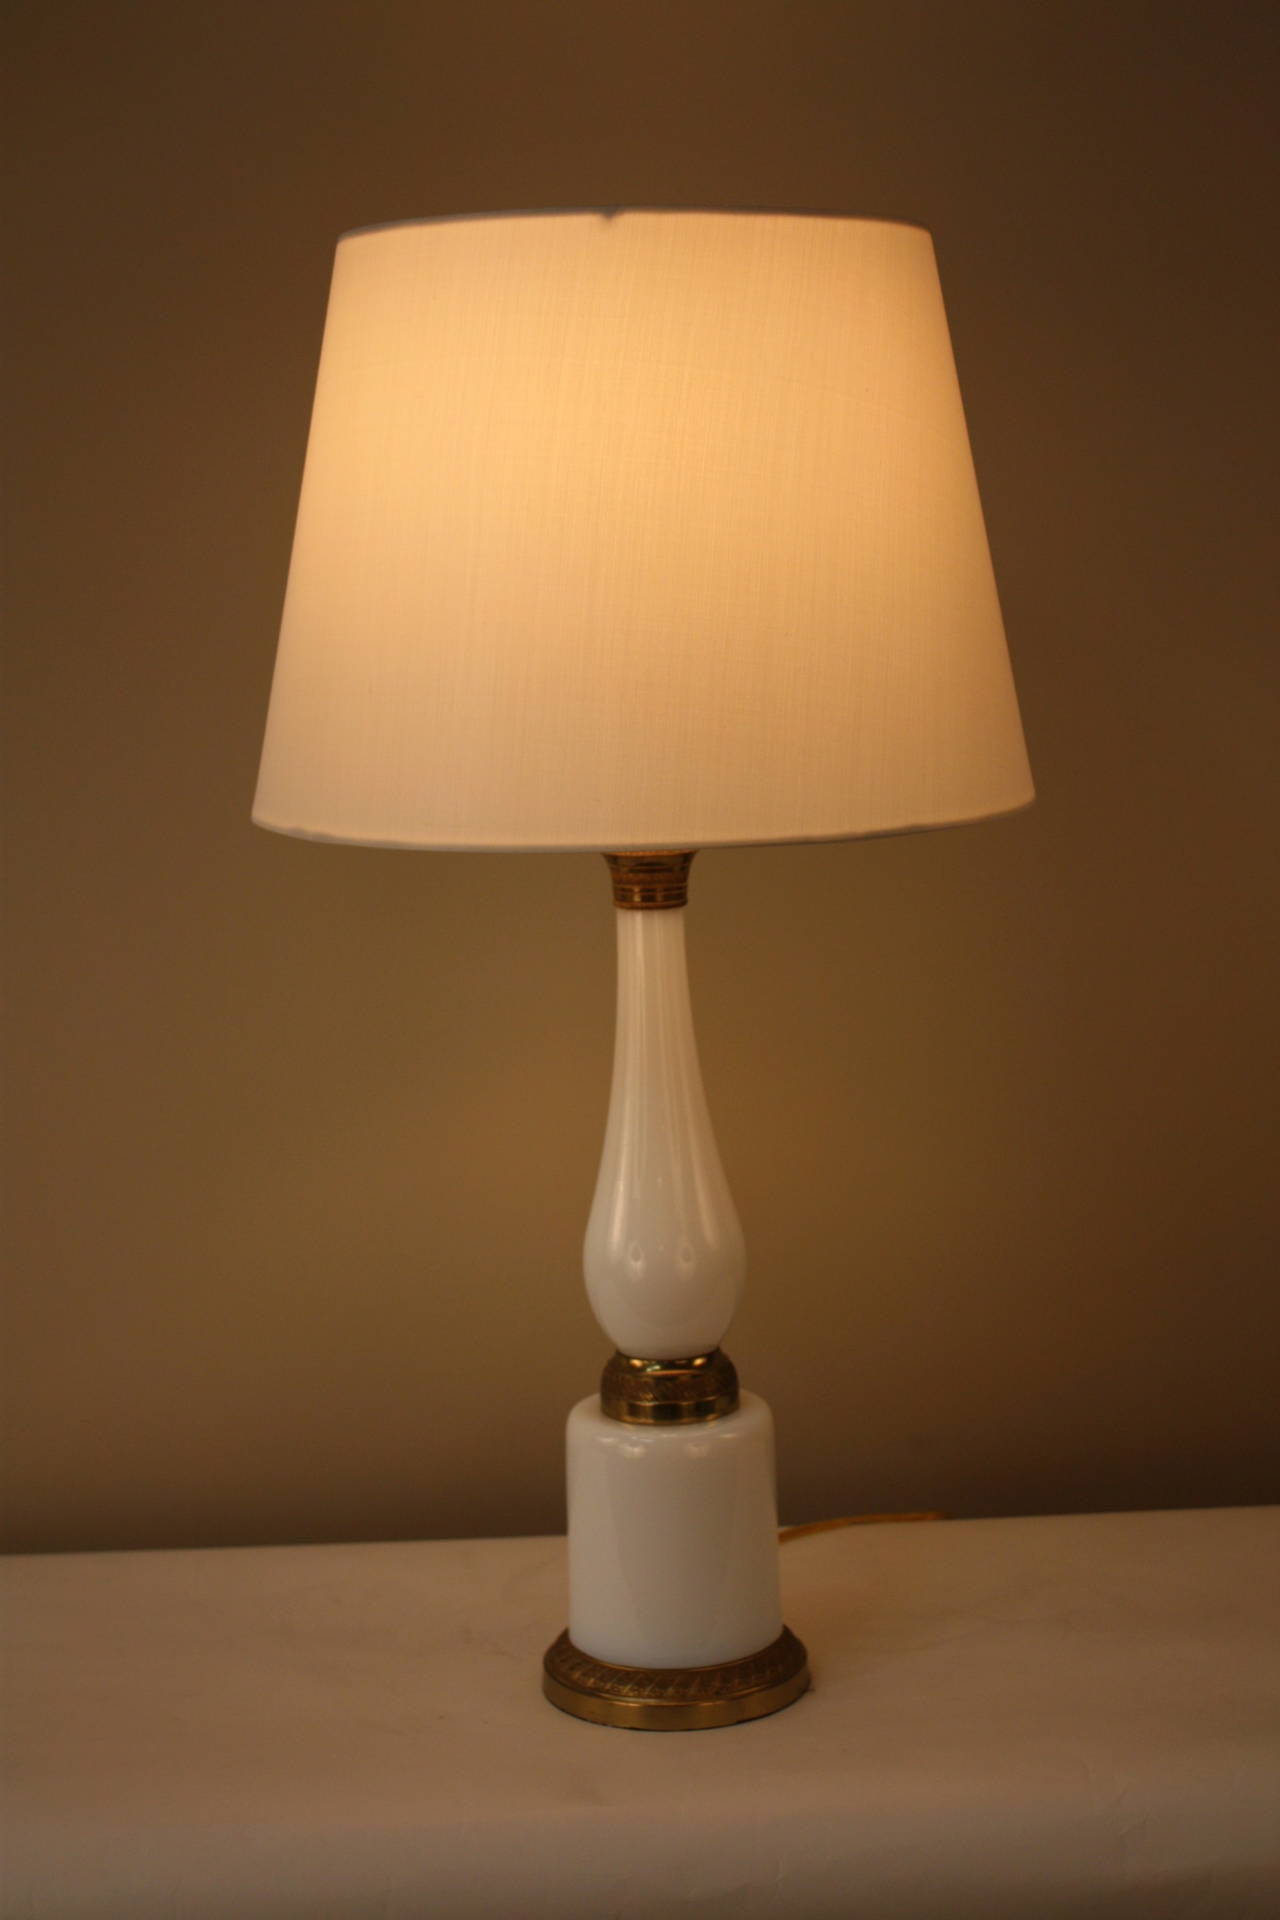 Beautiful 1930s French table lamp with classic bronze mounting and decoration.